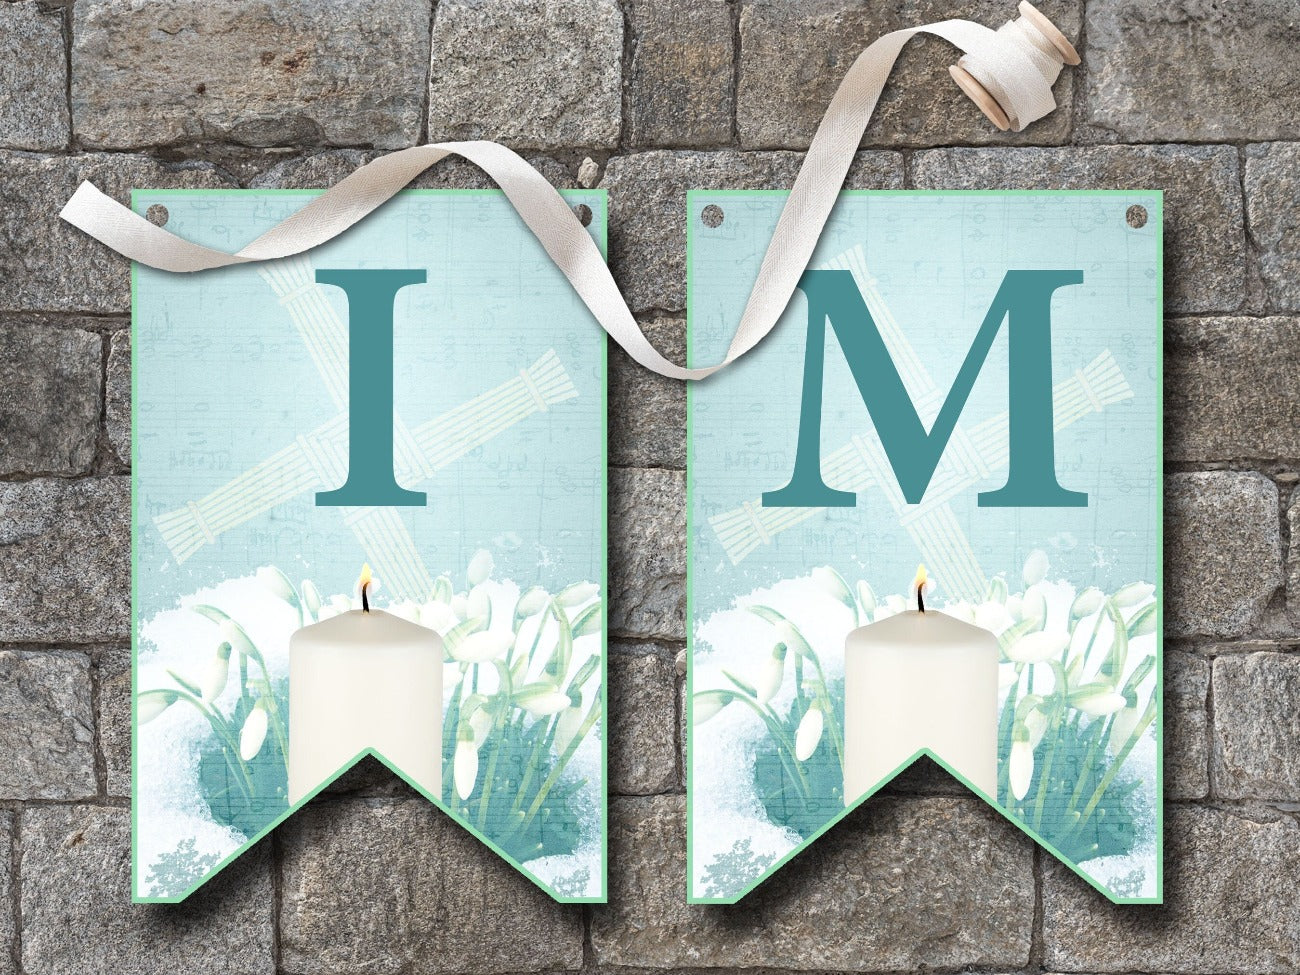 IMBOLC BANNER Bunting, Flags I and M, flags are pale blue with dark blue letters, each flag is imbellished with a Brigids Cross, snowdrops peeking through a layer of snow and a lit white candle - Morgana Magick Spell